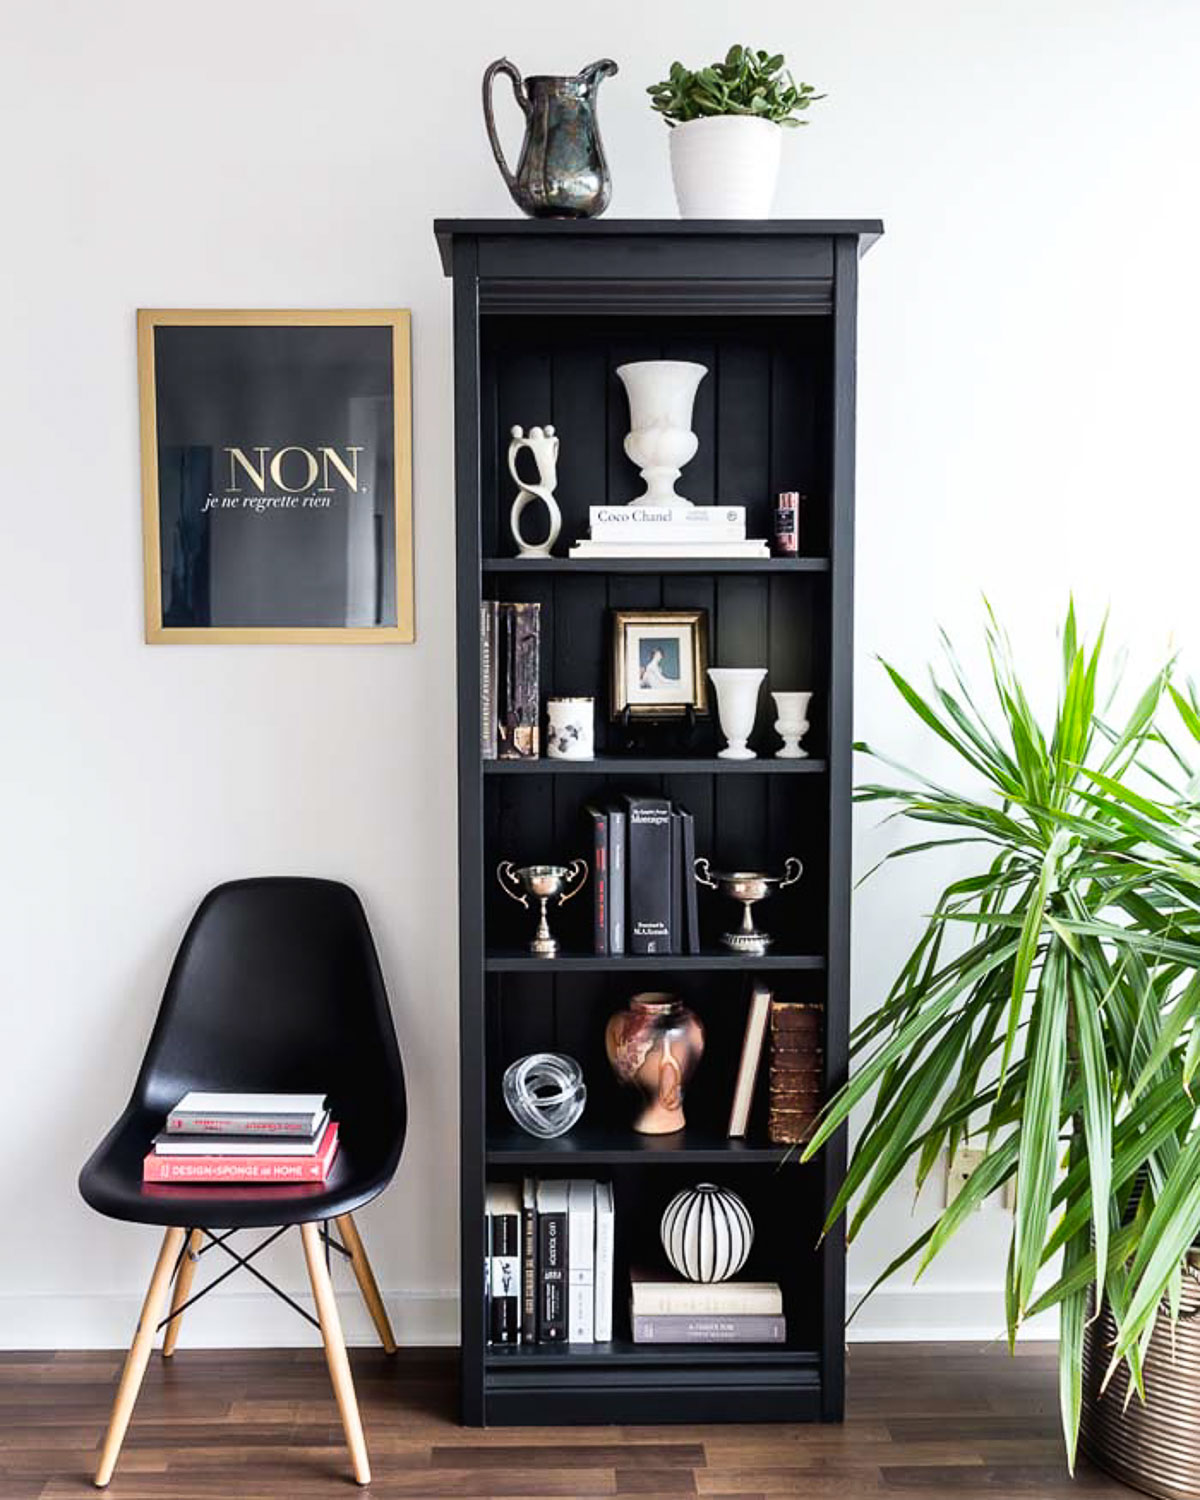 How to Style a Black Bookshelf - Books and Vases on Shelves